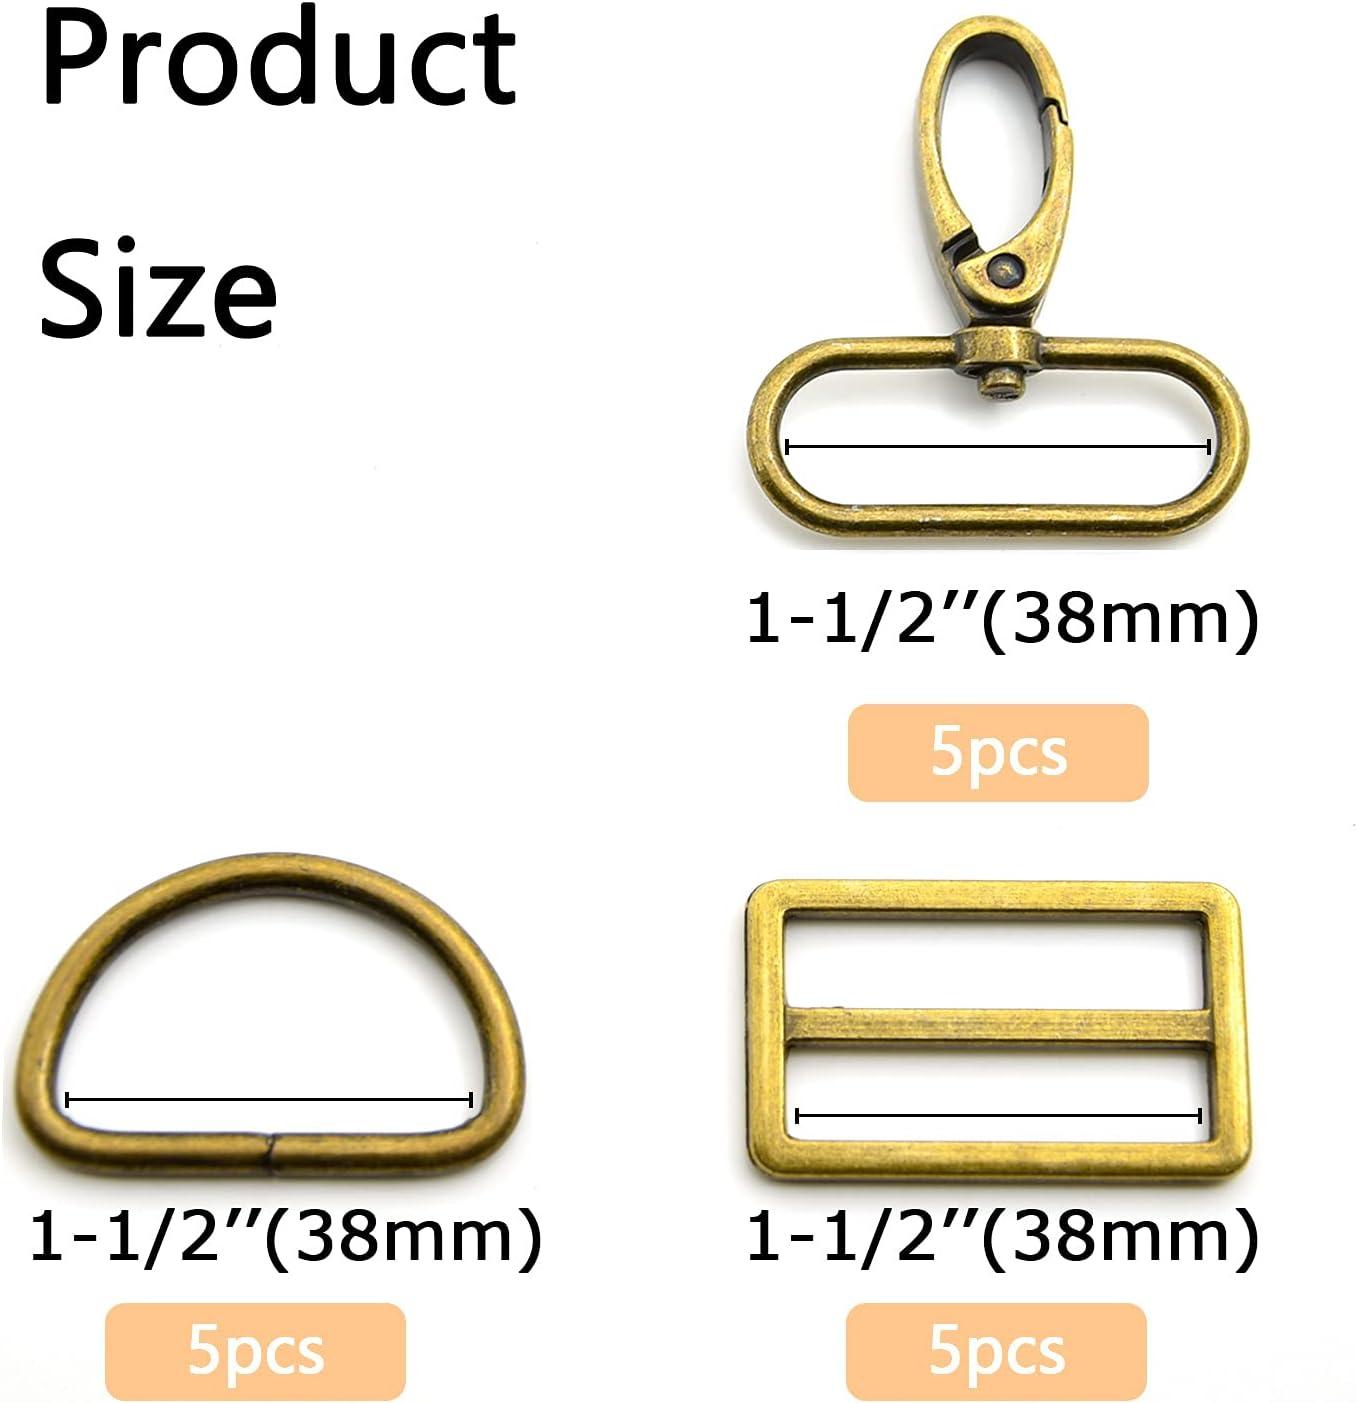 MELORDY 15Pcs Metal Swivel Snaps Hooks with D Rings and Tri-Glides Slide  Buckles for Key Lanyard Purse Bag Straps Dog Collars DIY Sewing Hardware  Craft (1-1/2 inch, Bronze) 1-1/2 inch Bronze